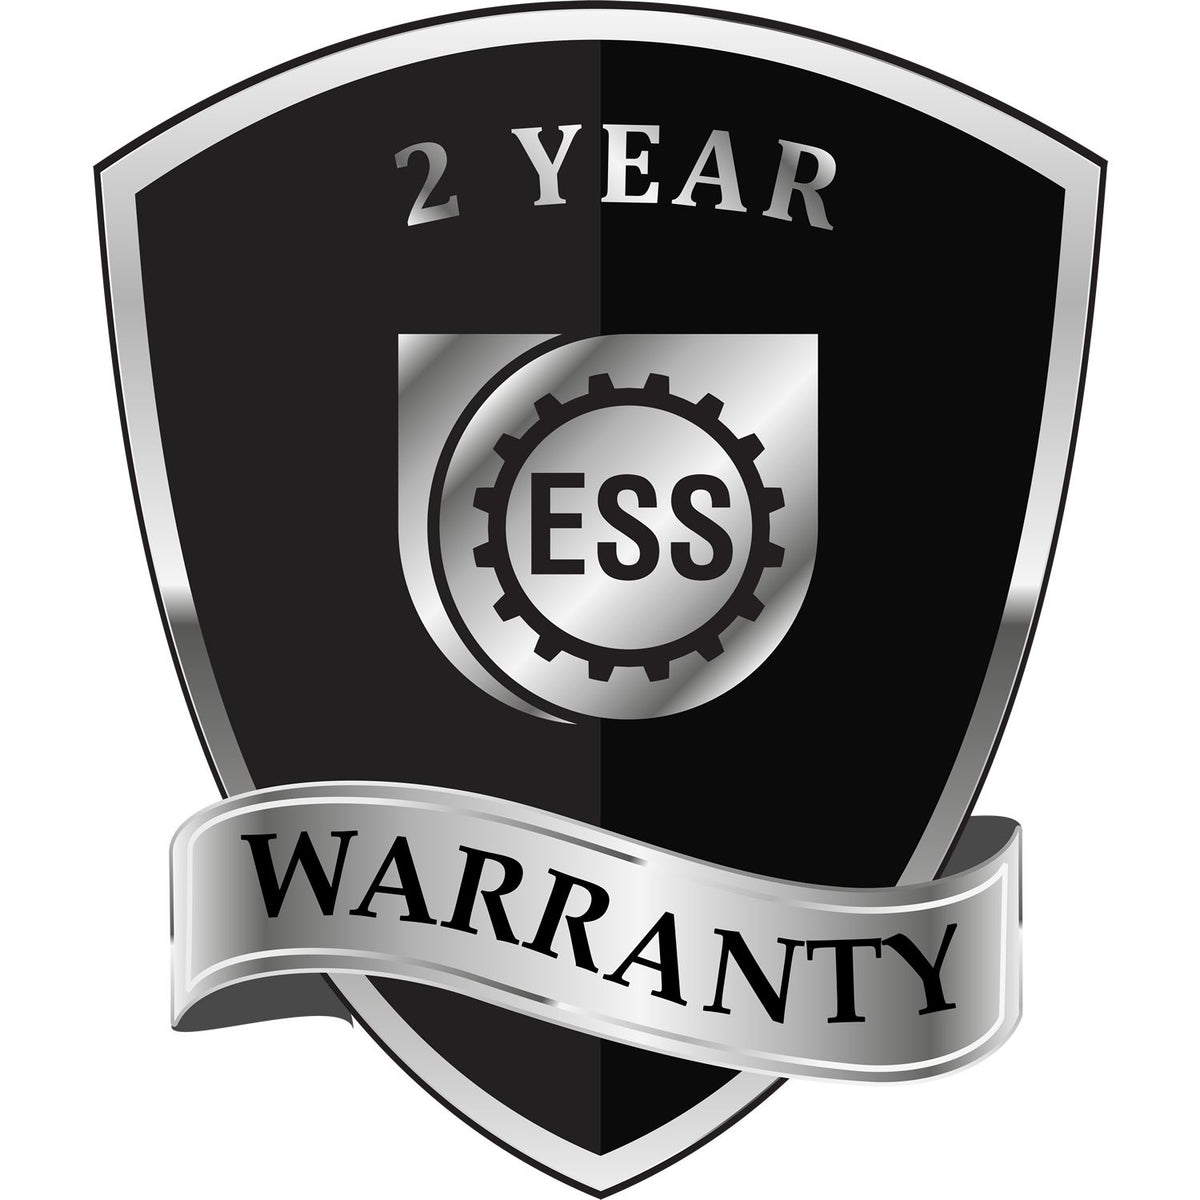 A black and silver badge or emblem showing warranty information for the Soft Idaho Professional Geologist Seal